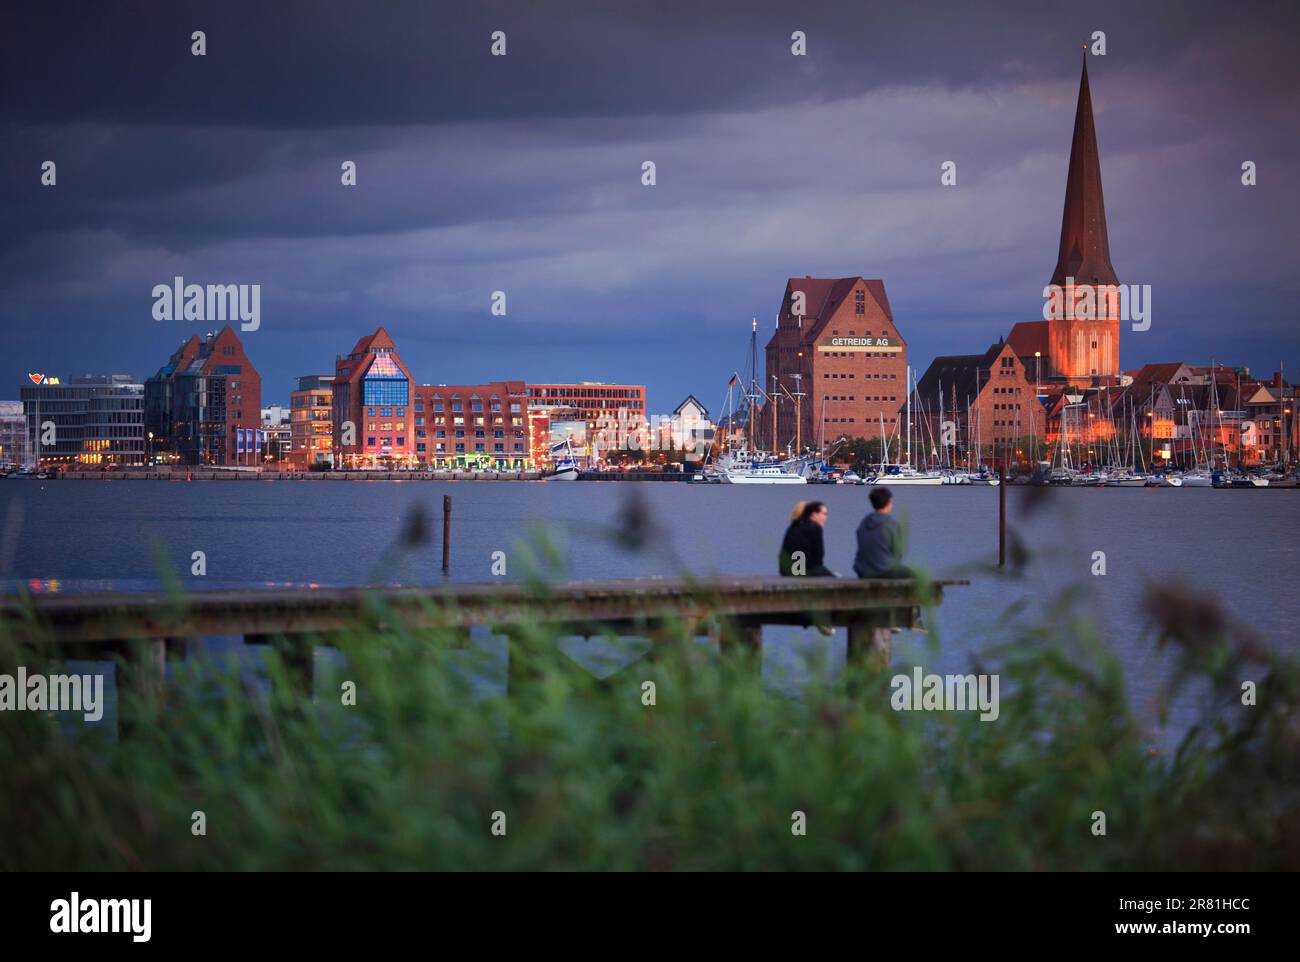 Rostock skyline, St. Peter's Church - Panorama of Rostock from the bank of the Warnow river Stock Photo